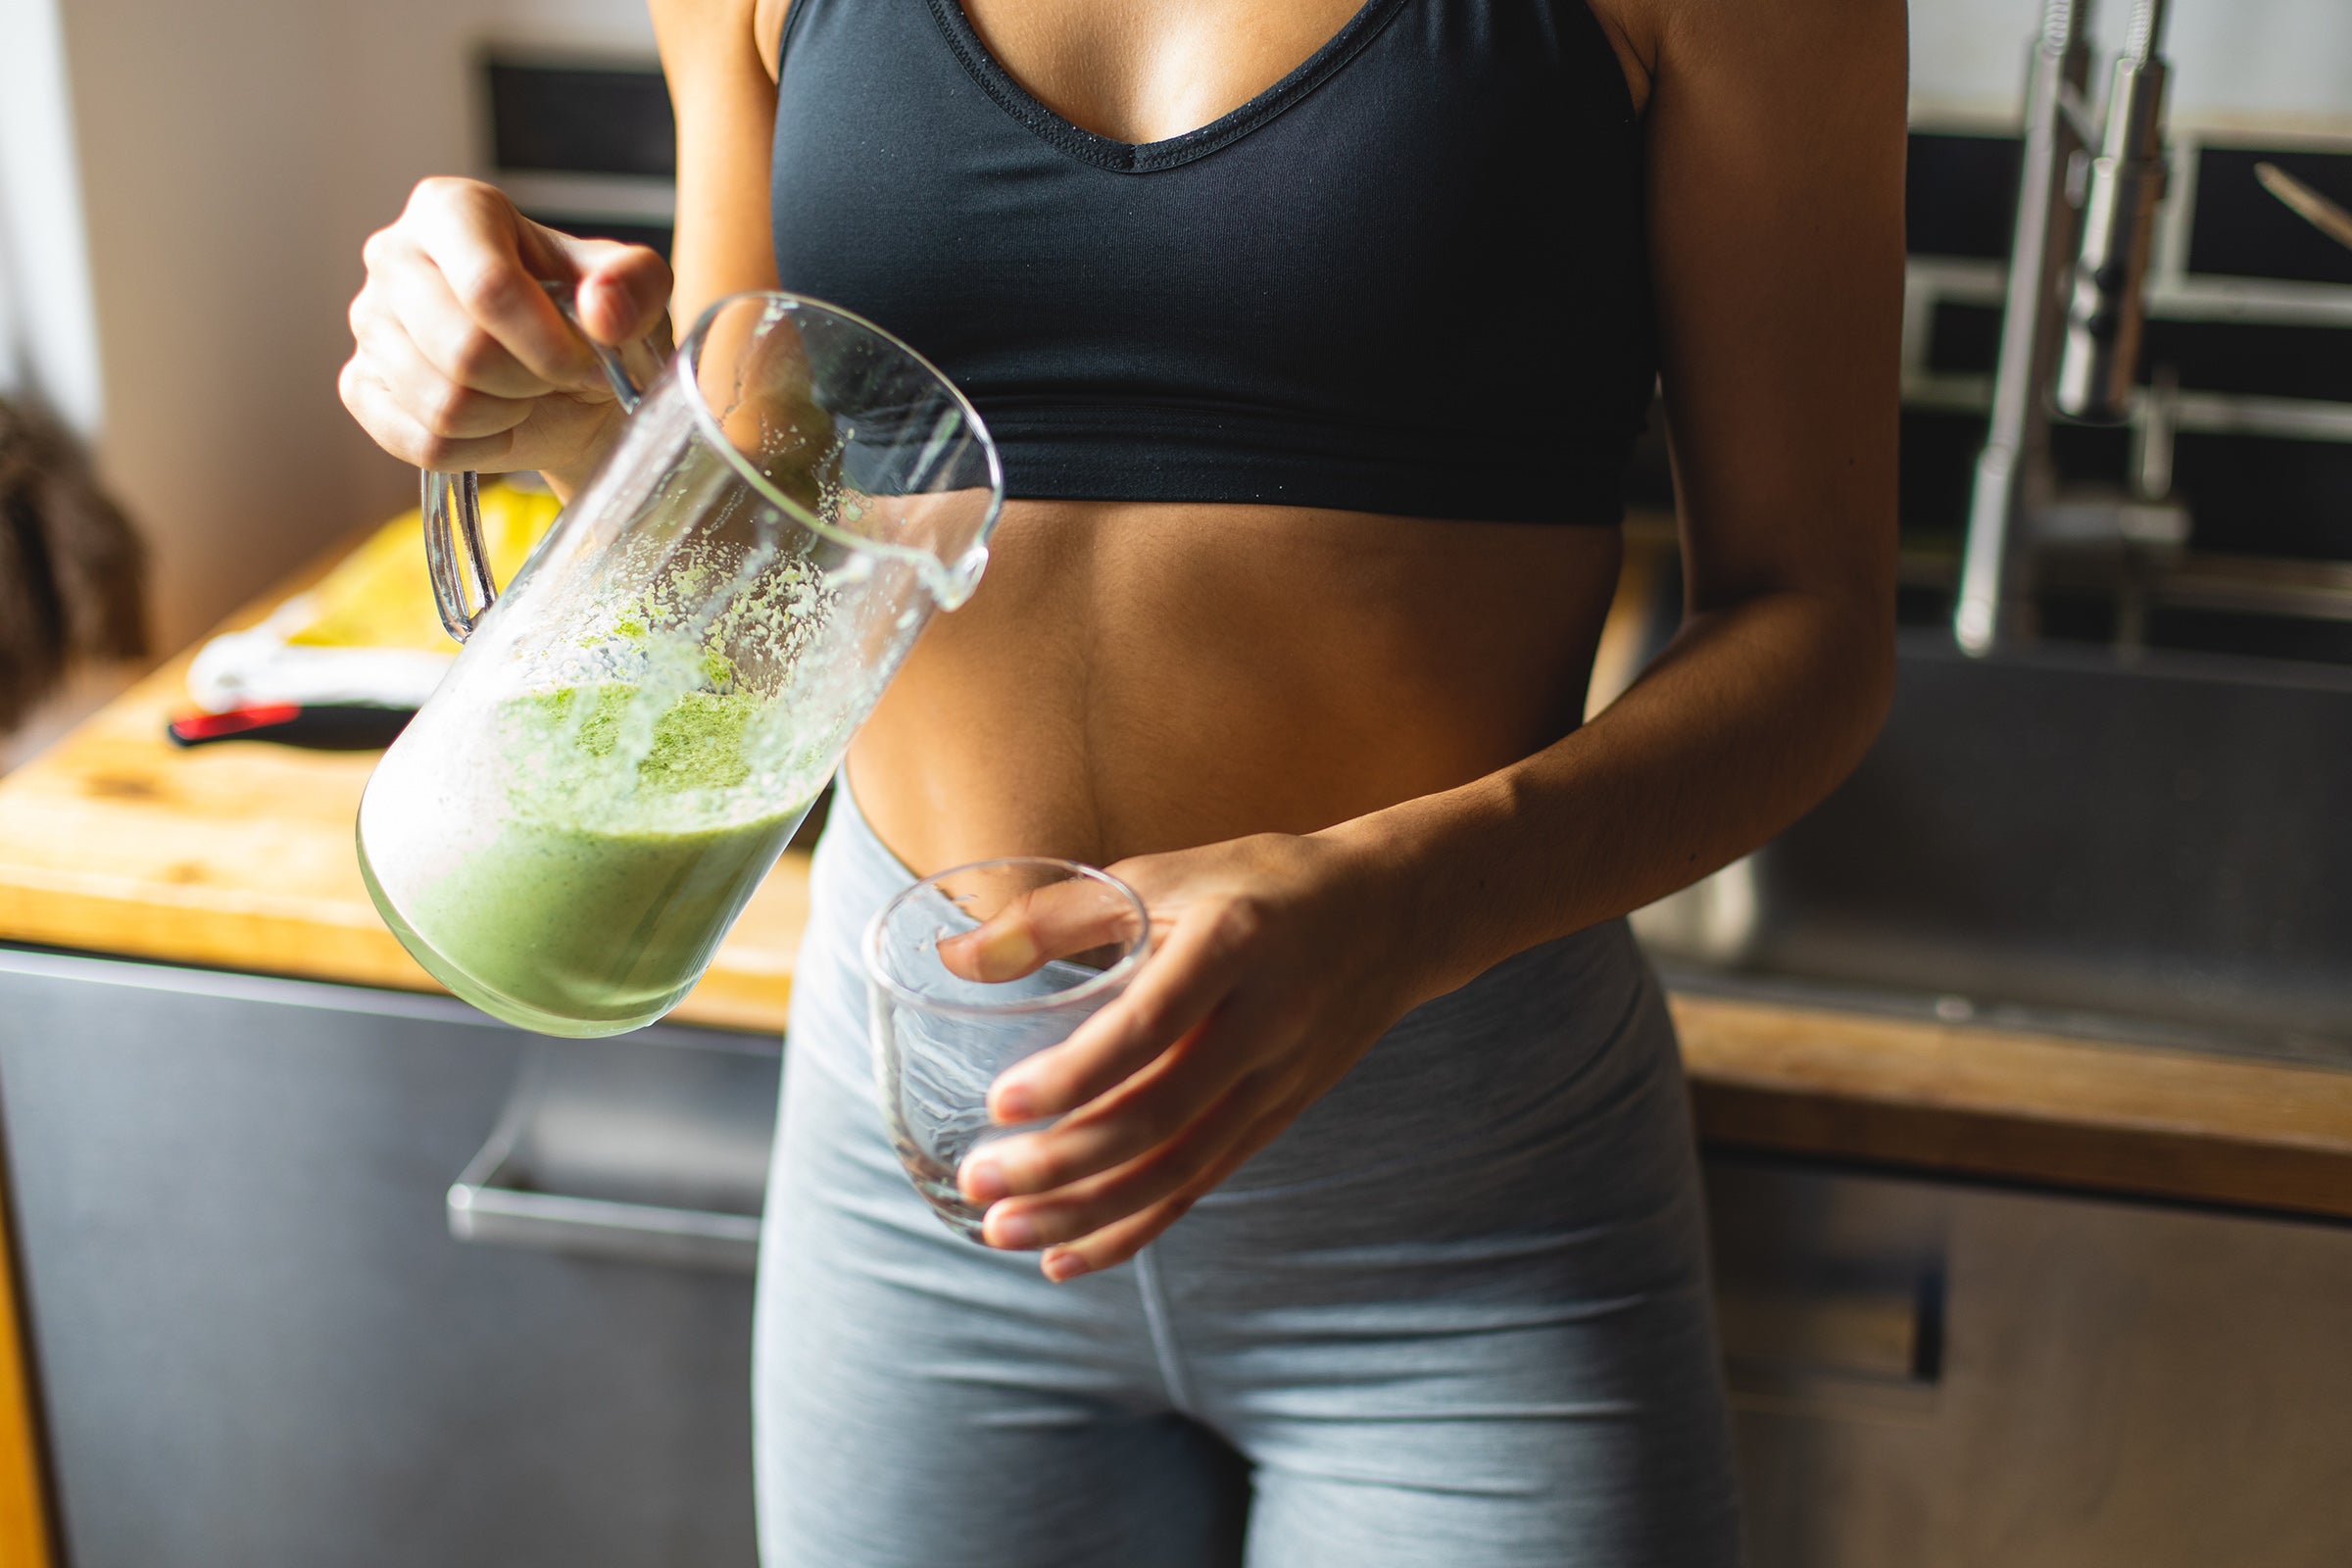 What are Detox Diets?